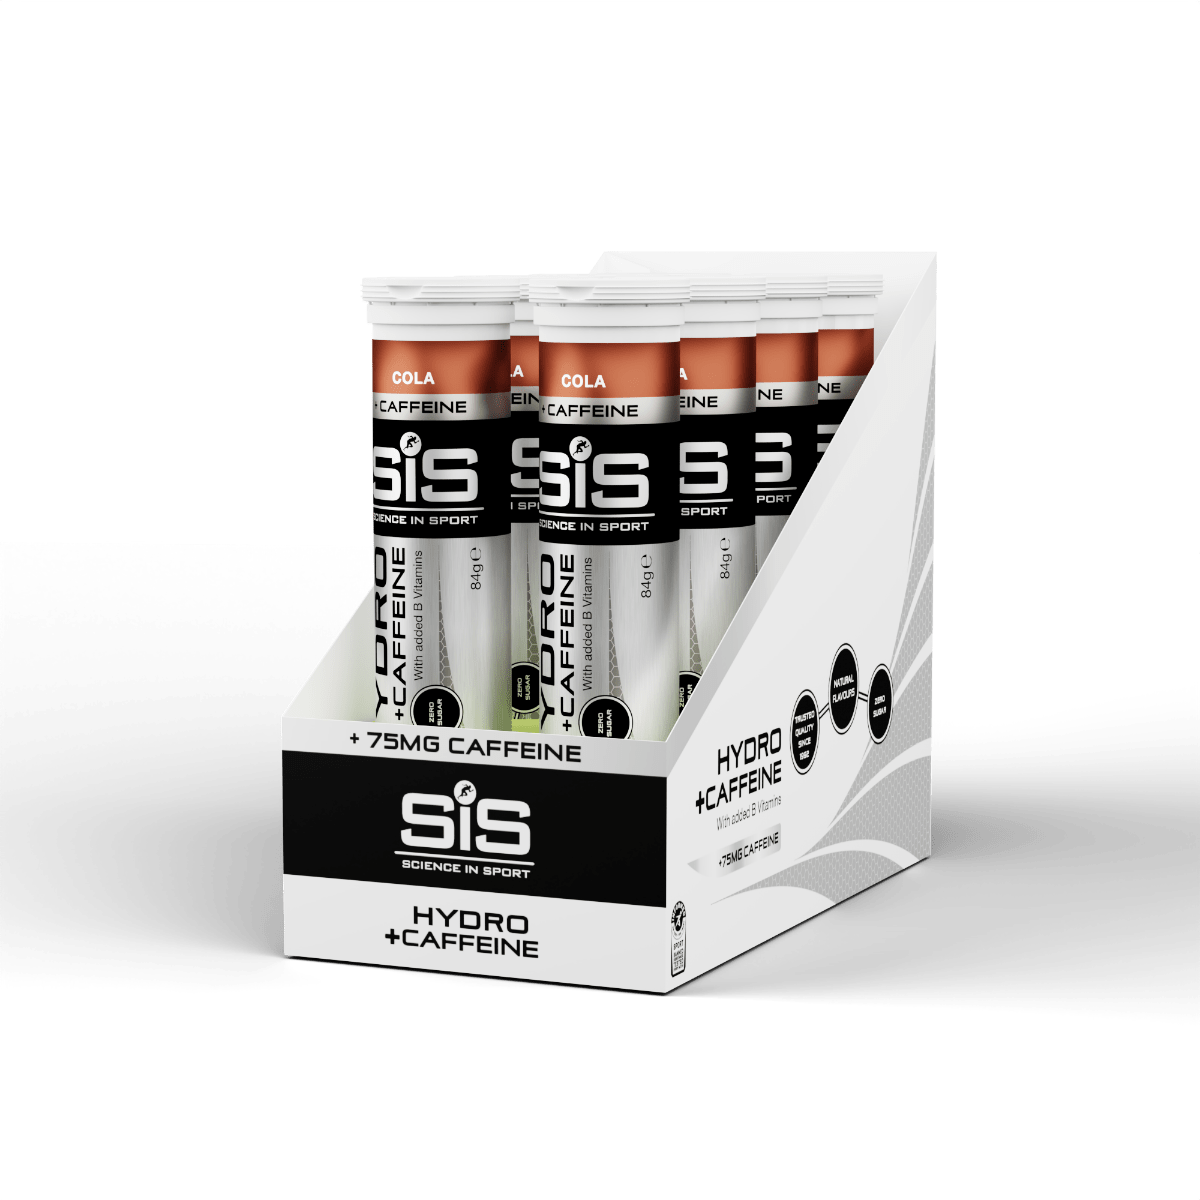 SiS Electrolyte Drinks Cola (Caffeine) / Box of 8 Tubes GO Hydro Electrolyte Tablets XMiles